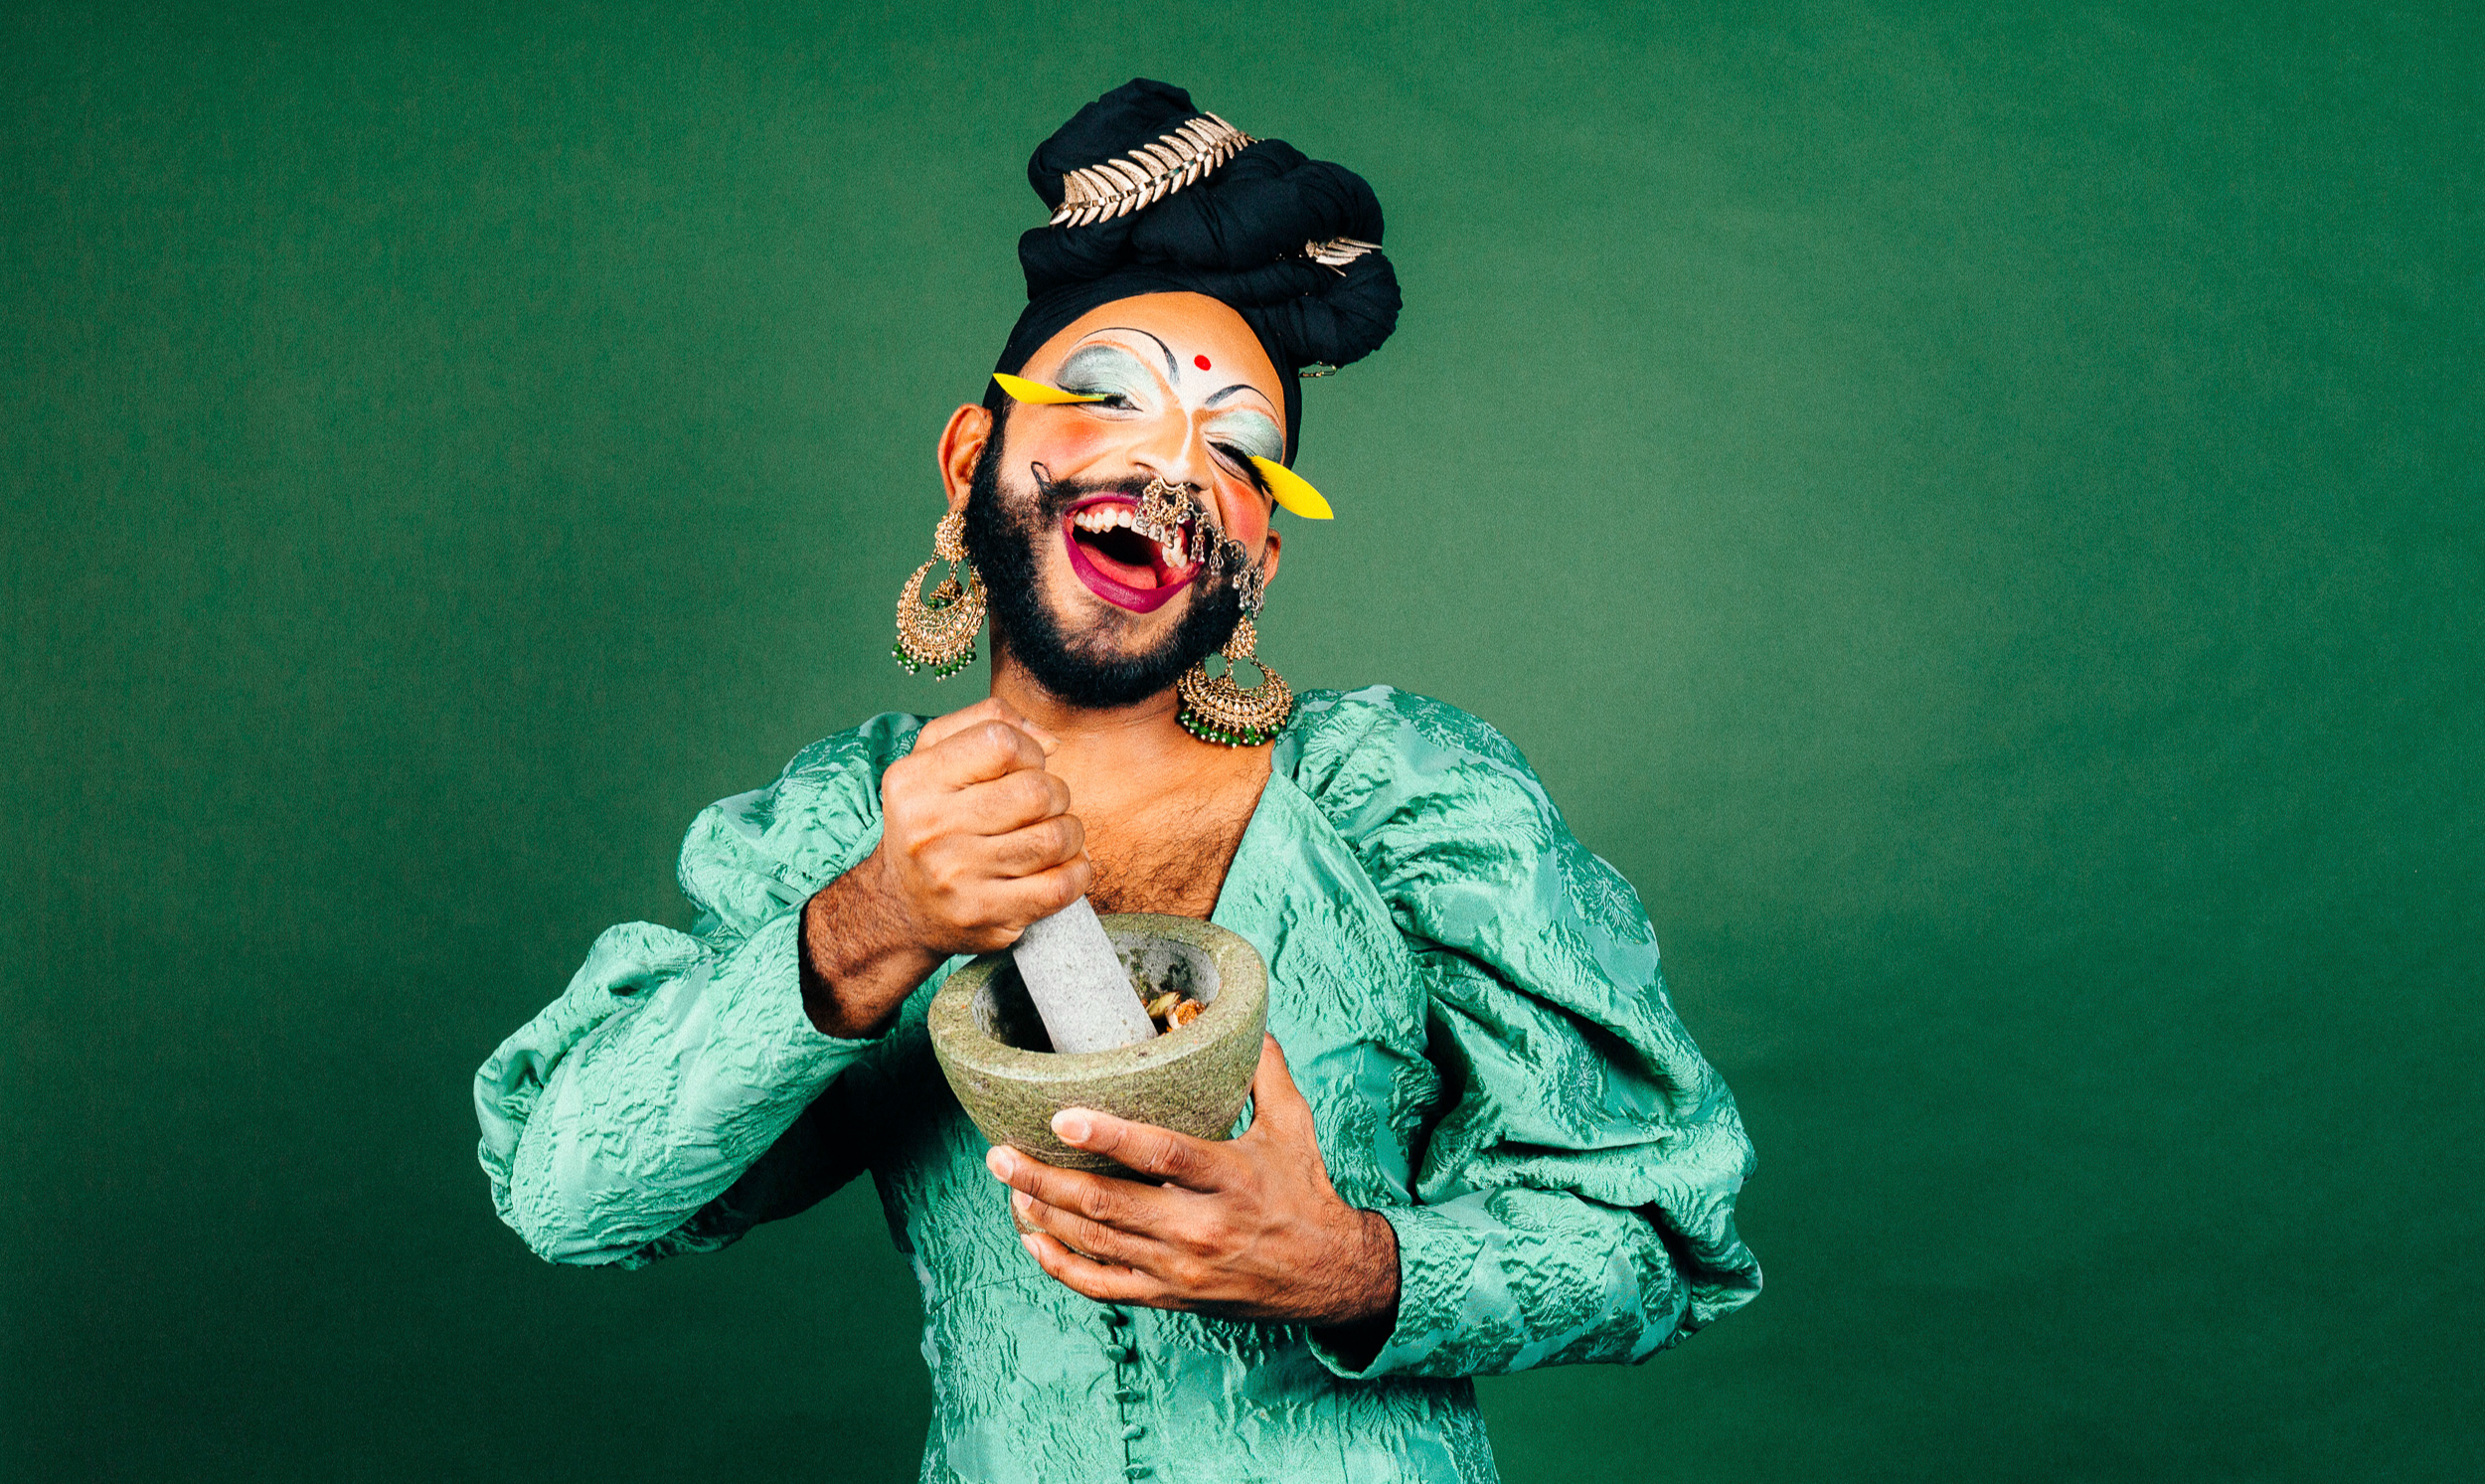 Radha, a South Asian drag performer, laughs at the camera while grinding ingredients in a mortar and pestle. They wear a turquoise satin dress, gold earrings, yellow false lashes, silver eyeshadow and a black turban.